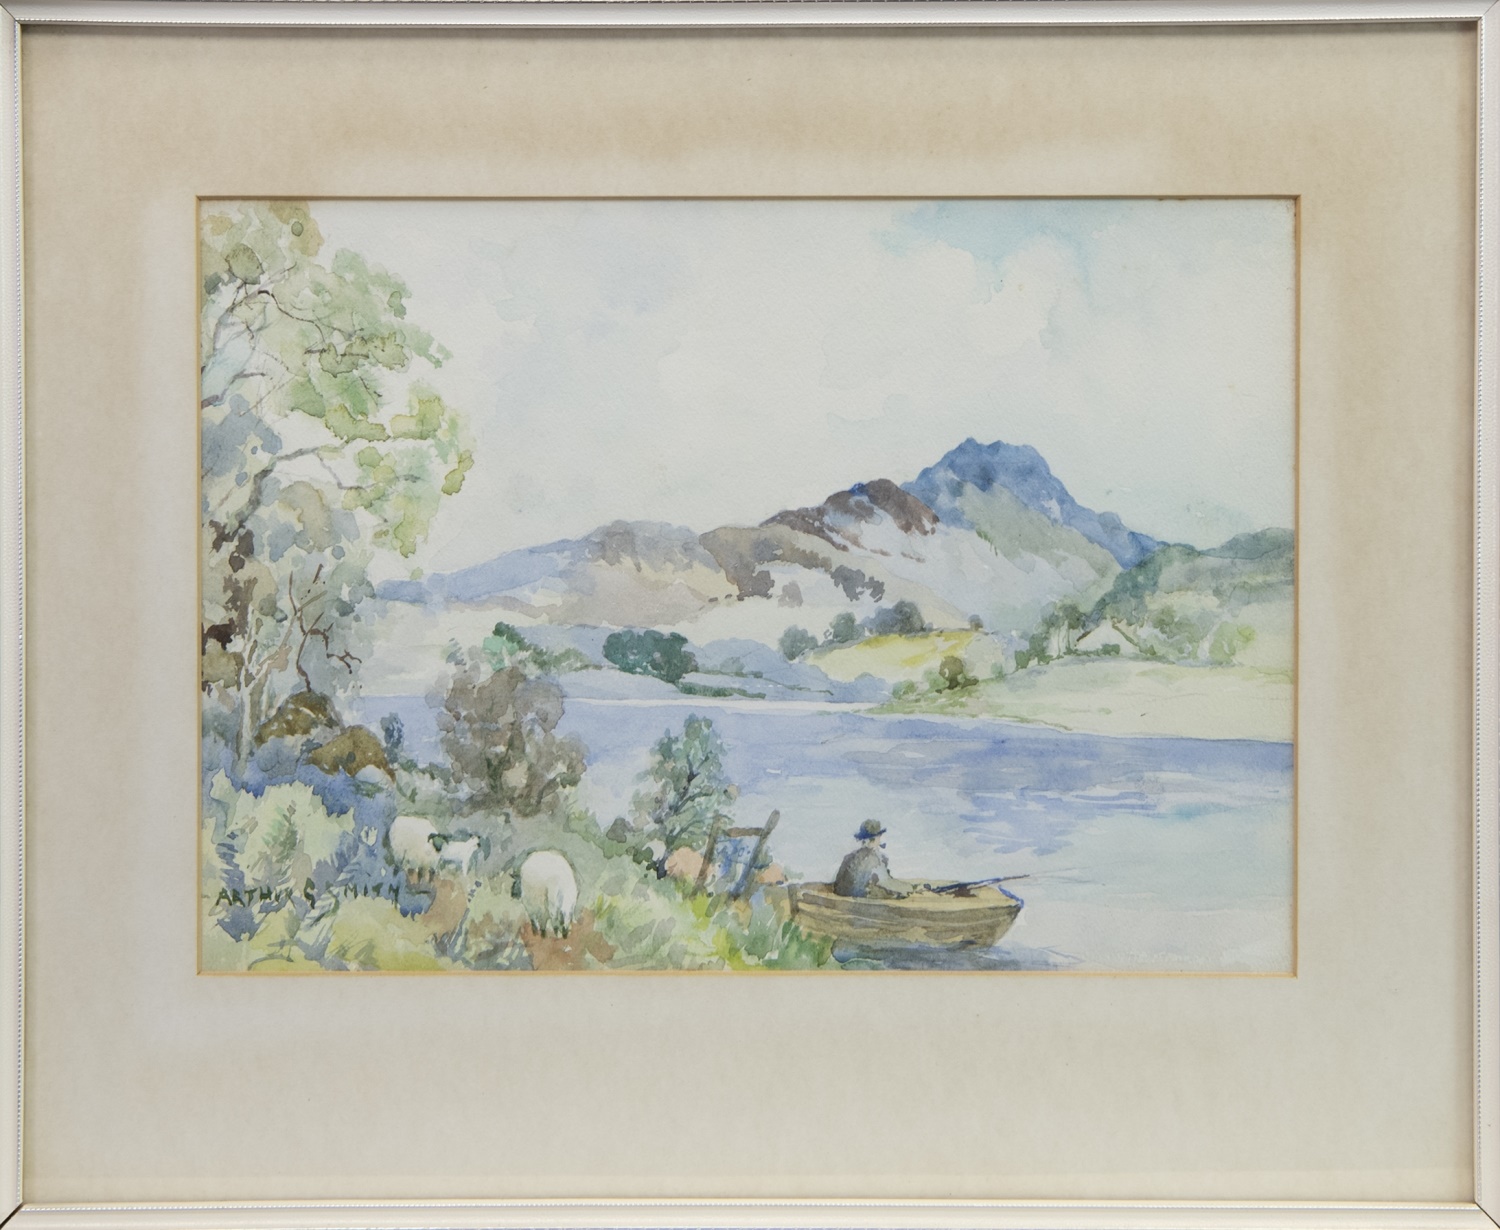 TWO WATERCOLOURS BY ARTHUR C SMITH - Image 2 of 2